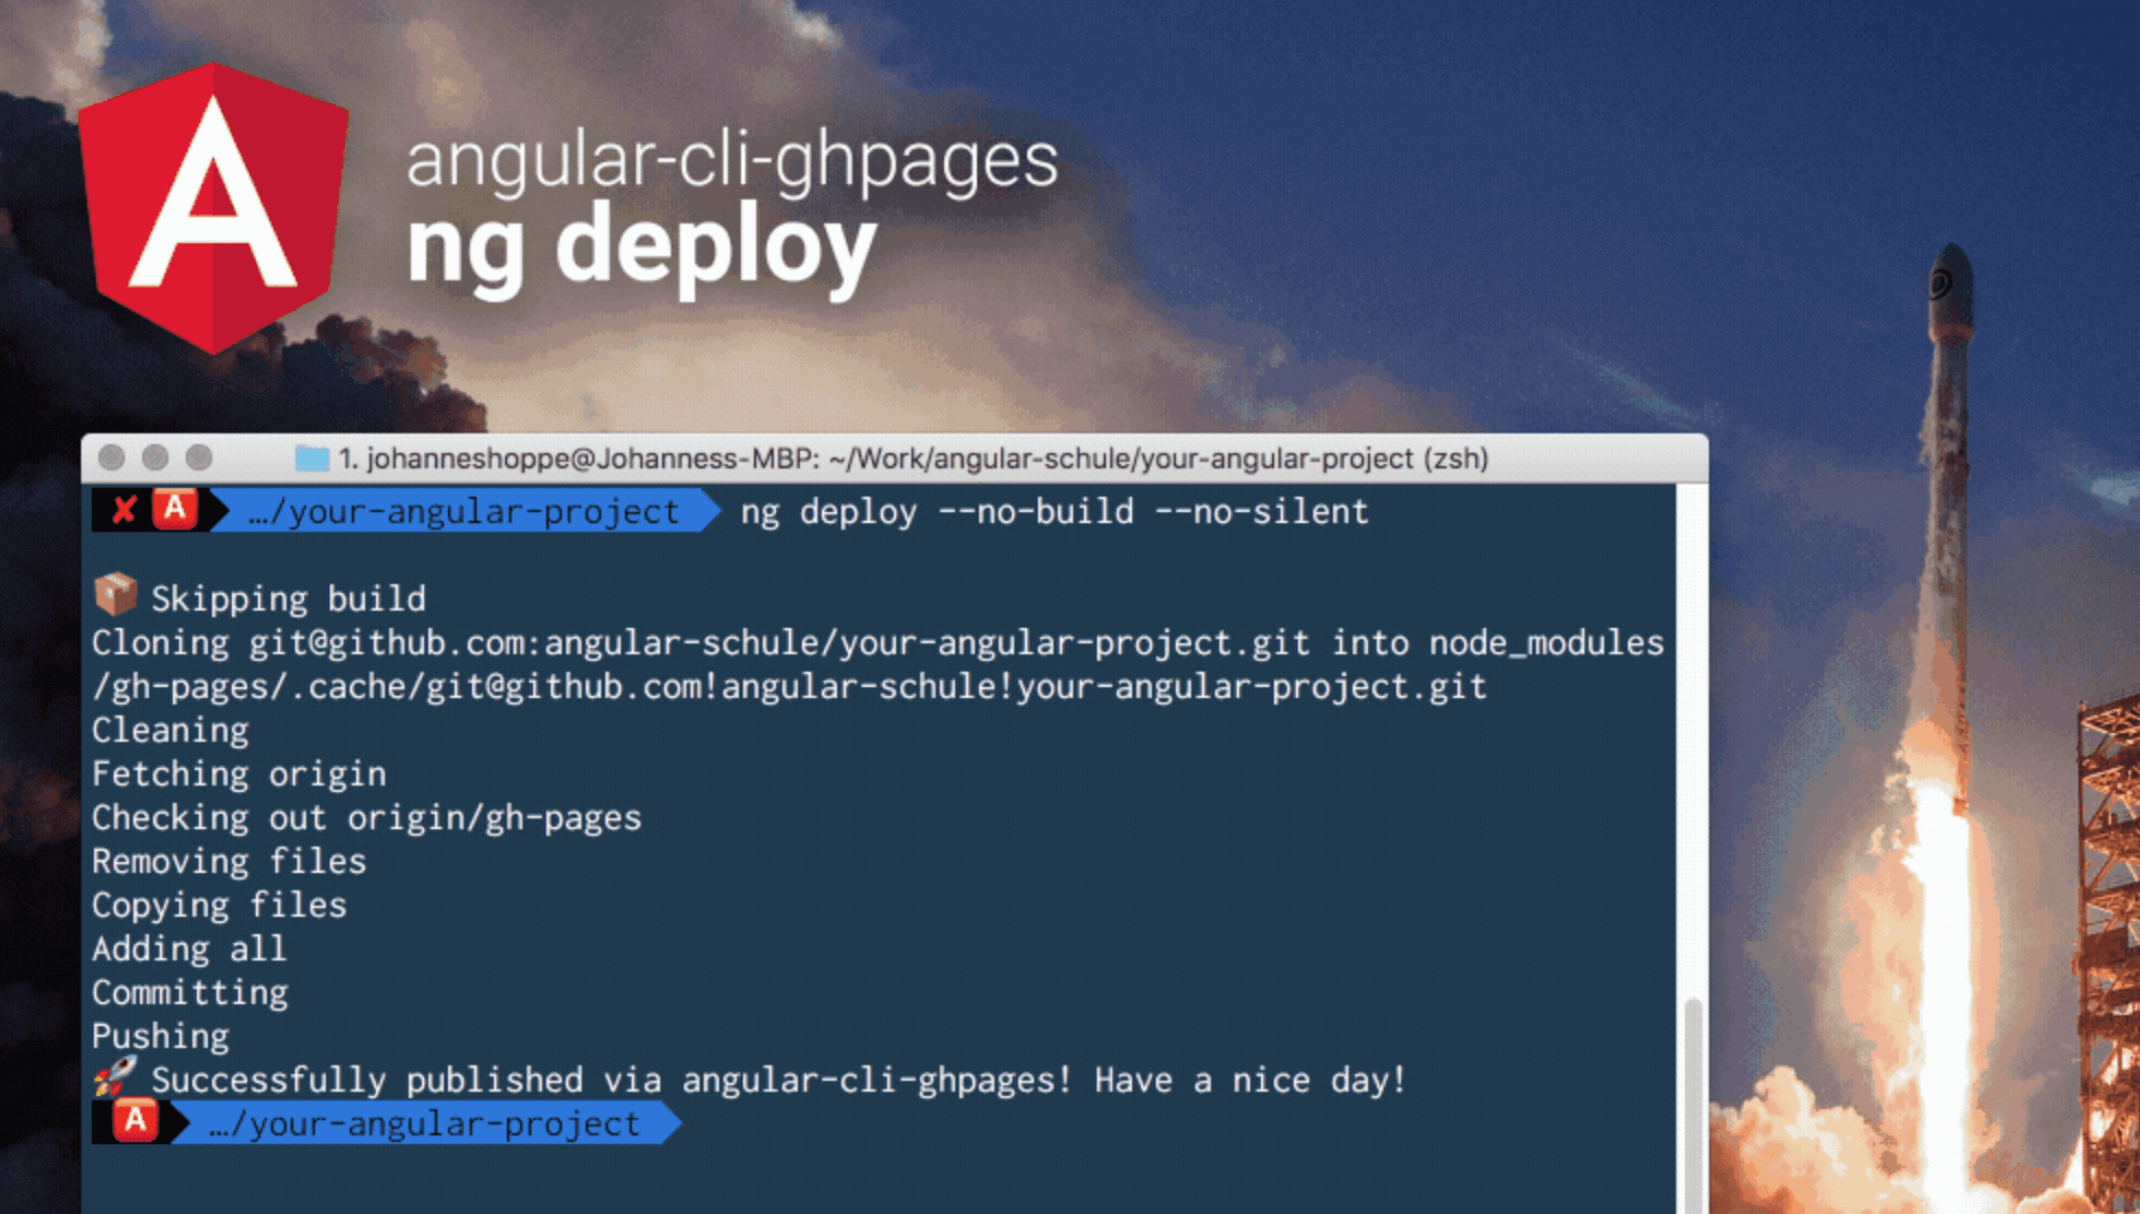 angular-cli-ghpages